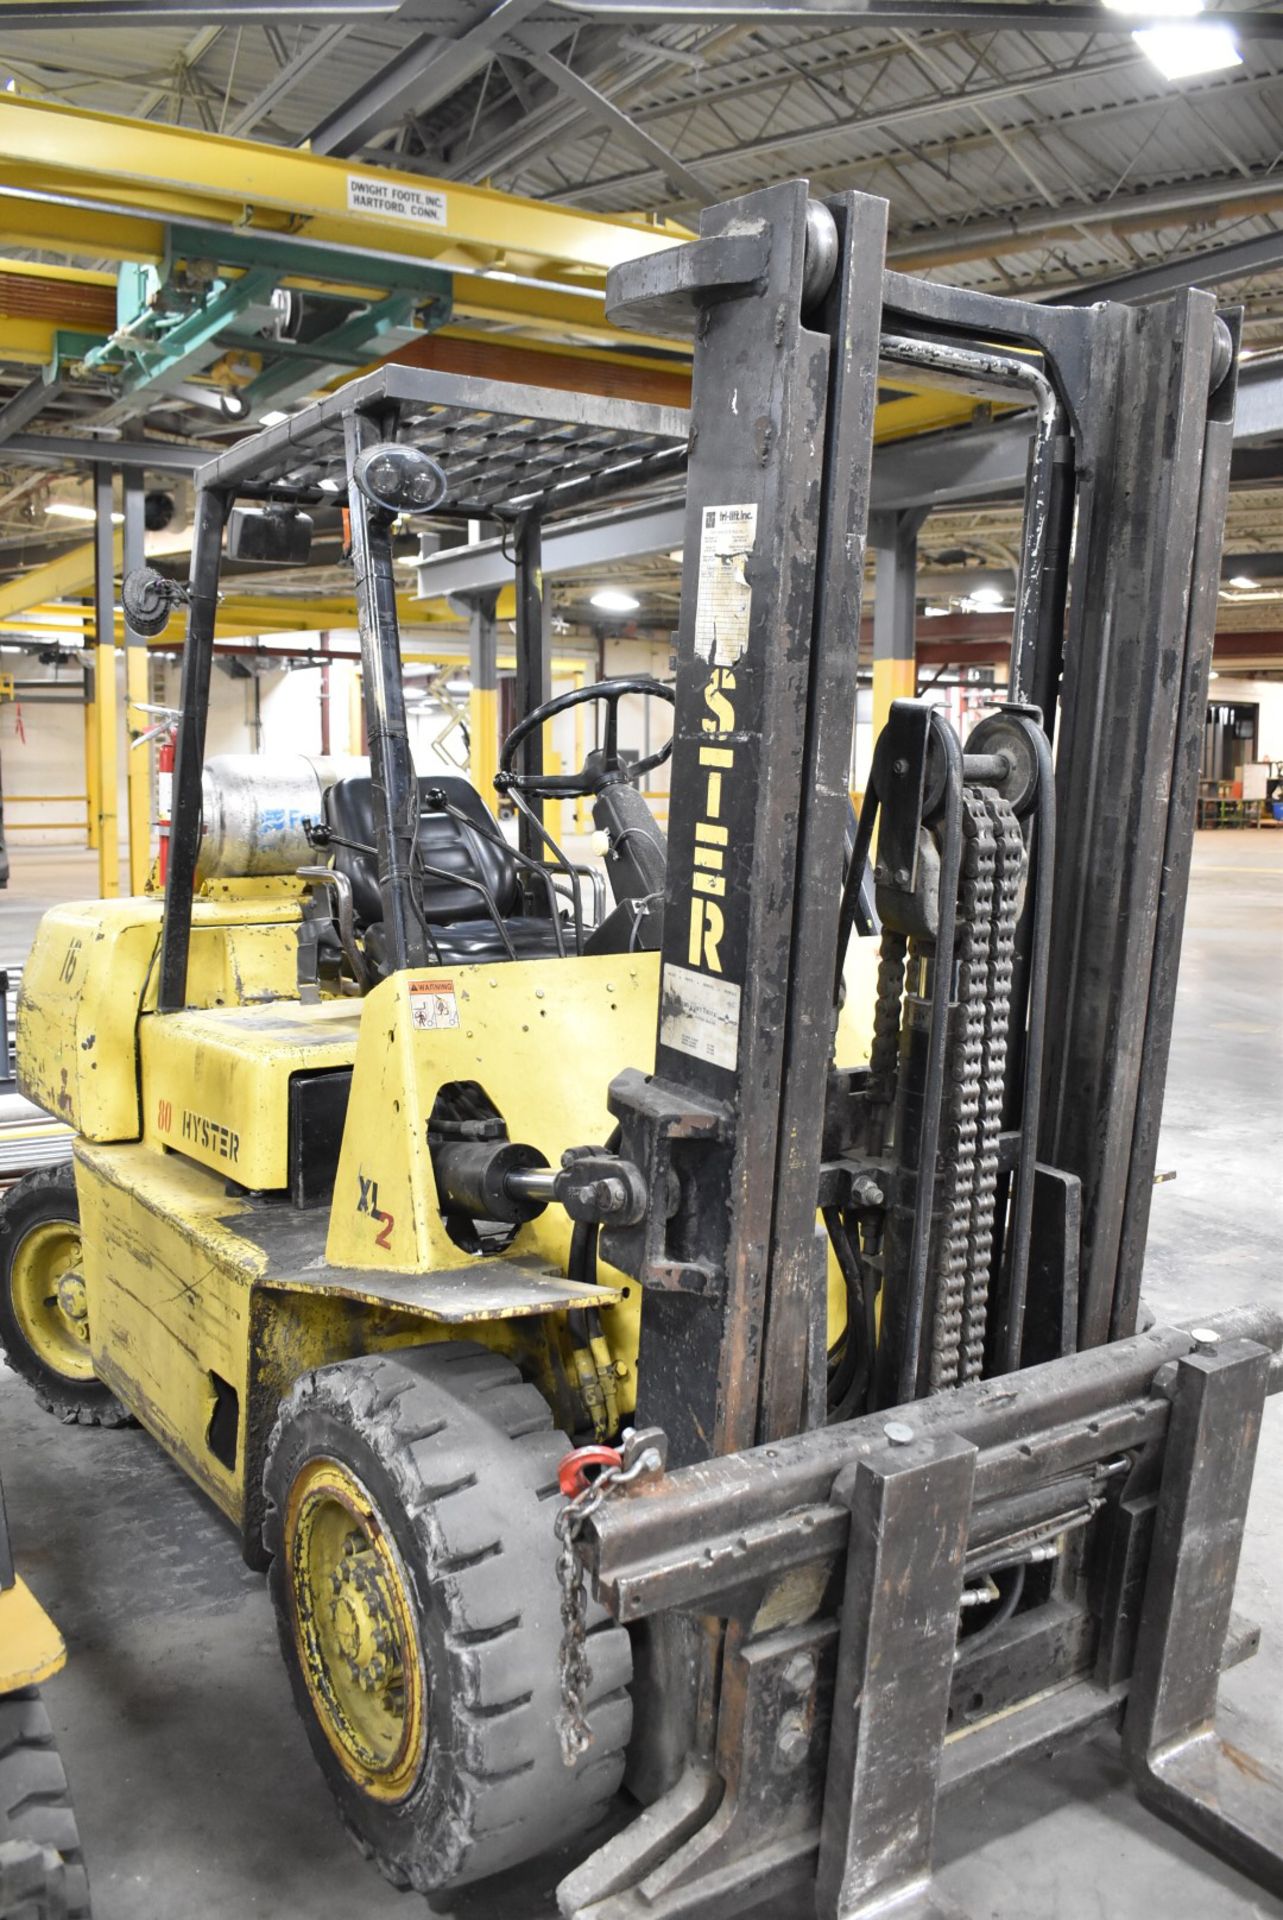 HYSTER H80XL2 7,250 LBS. CAPACITY LPG FORKLIFT WITH 121" MAX VERTICAL REACH, 2-STAGE HIGH VISIBILITY - Image 3 of 9